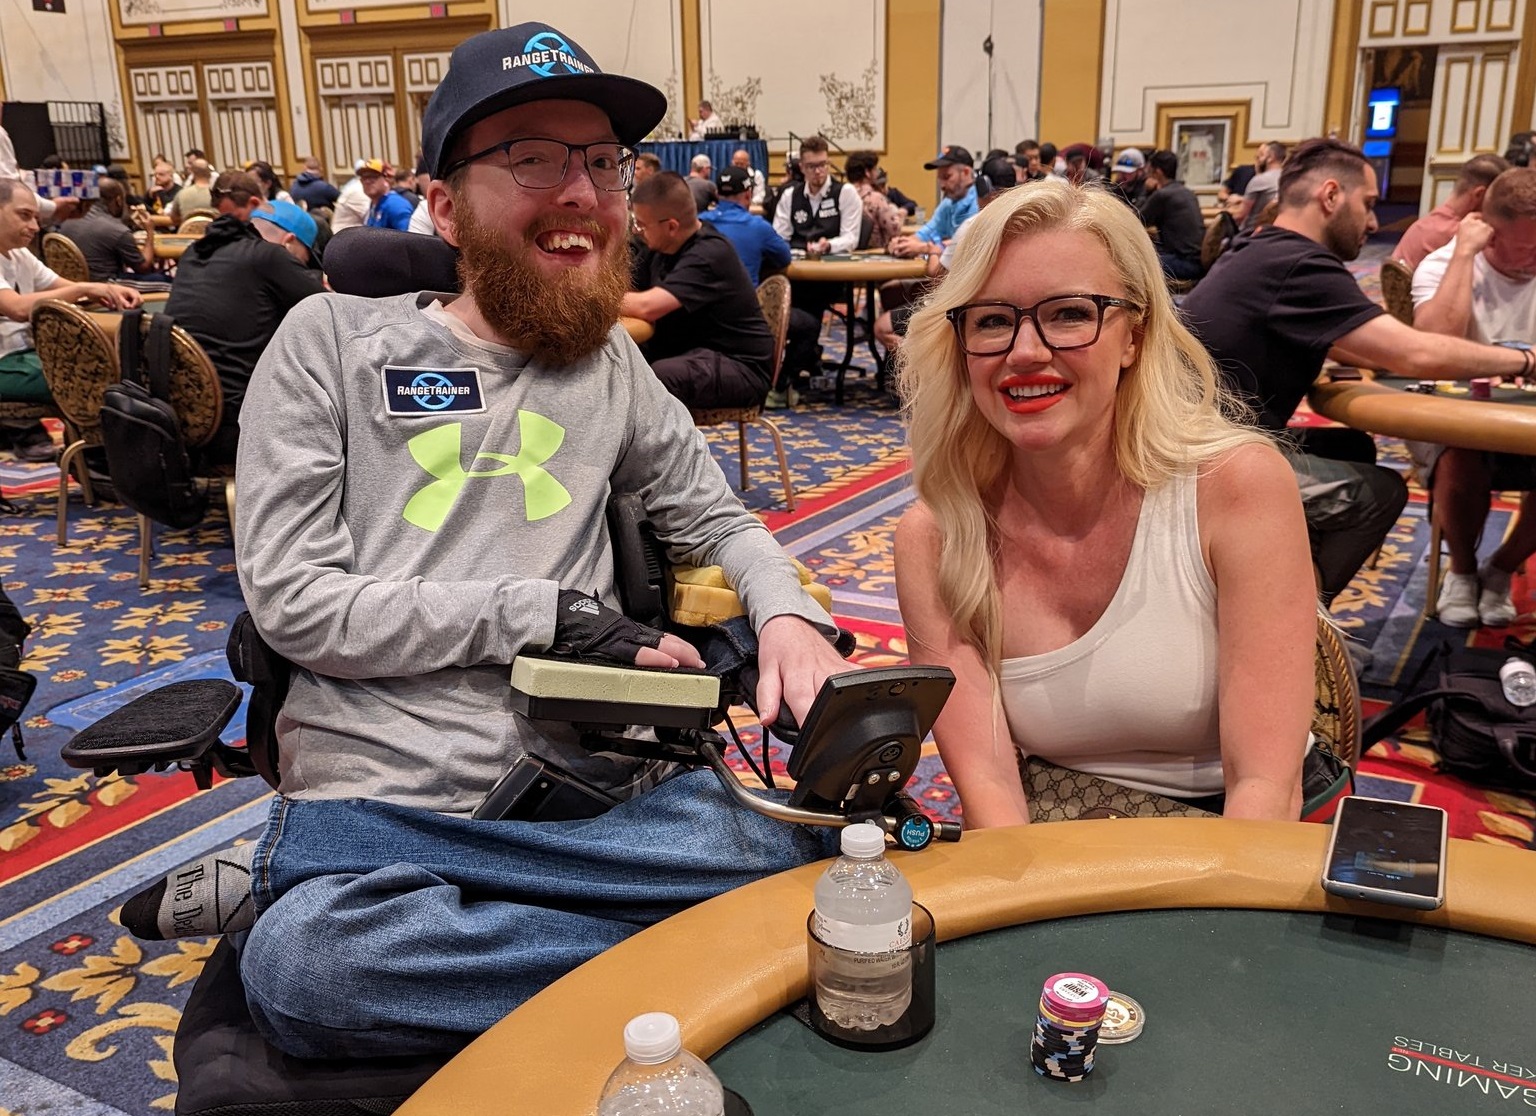 K.L. Cleeton Spars with Kitty Quo over Player Assistants at WSOP